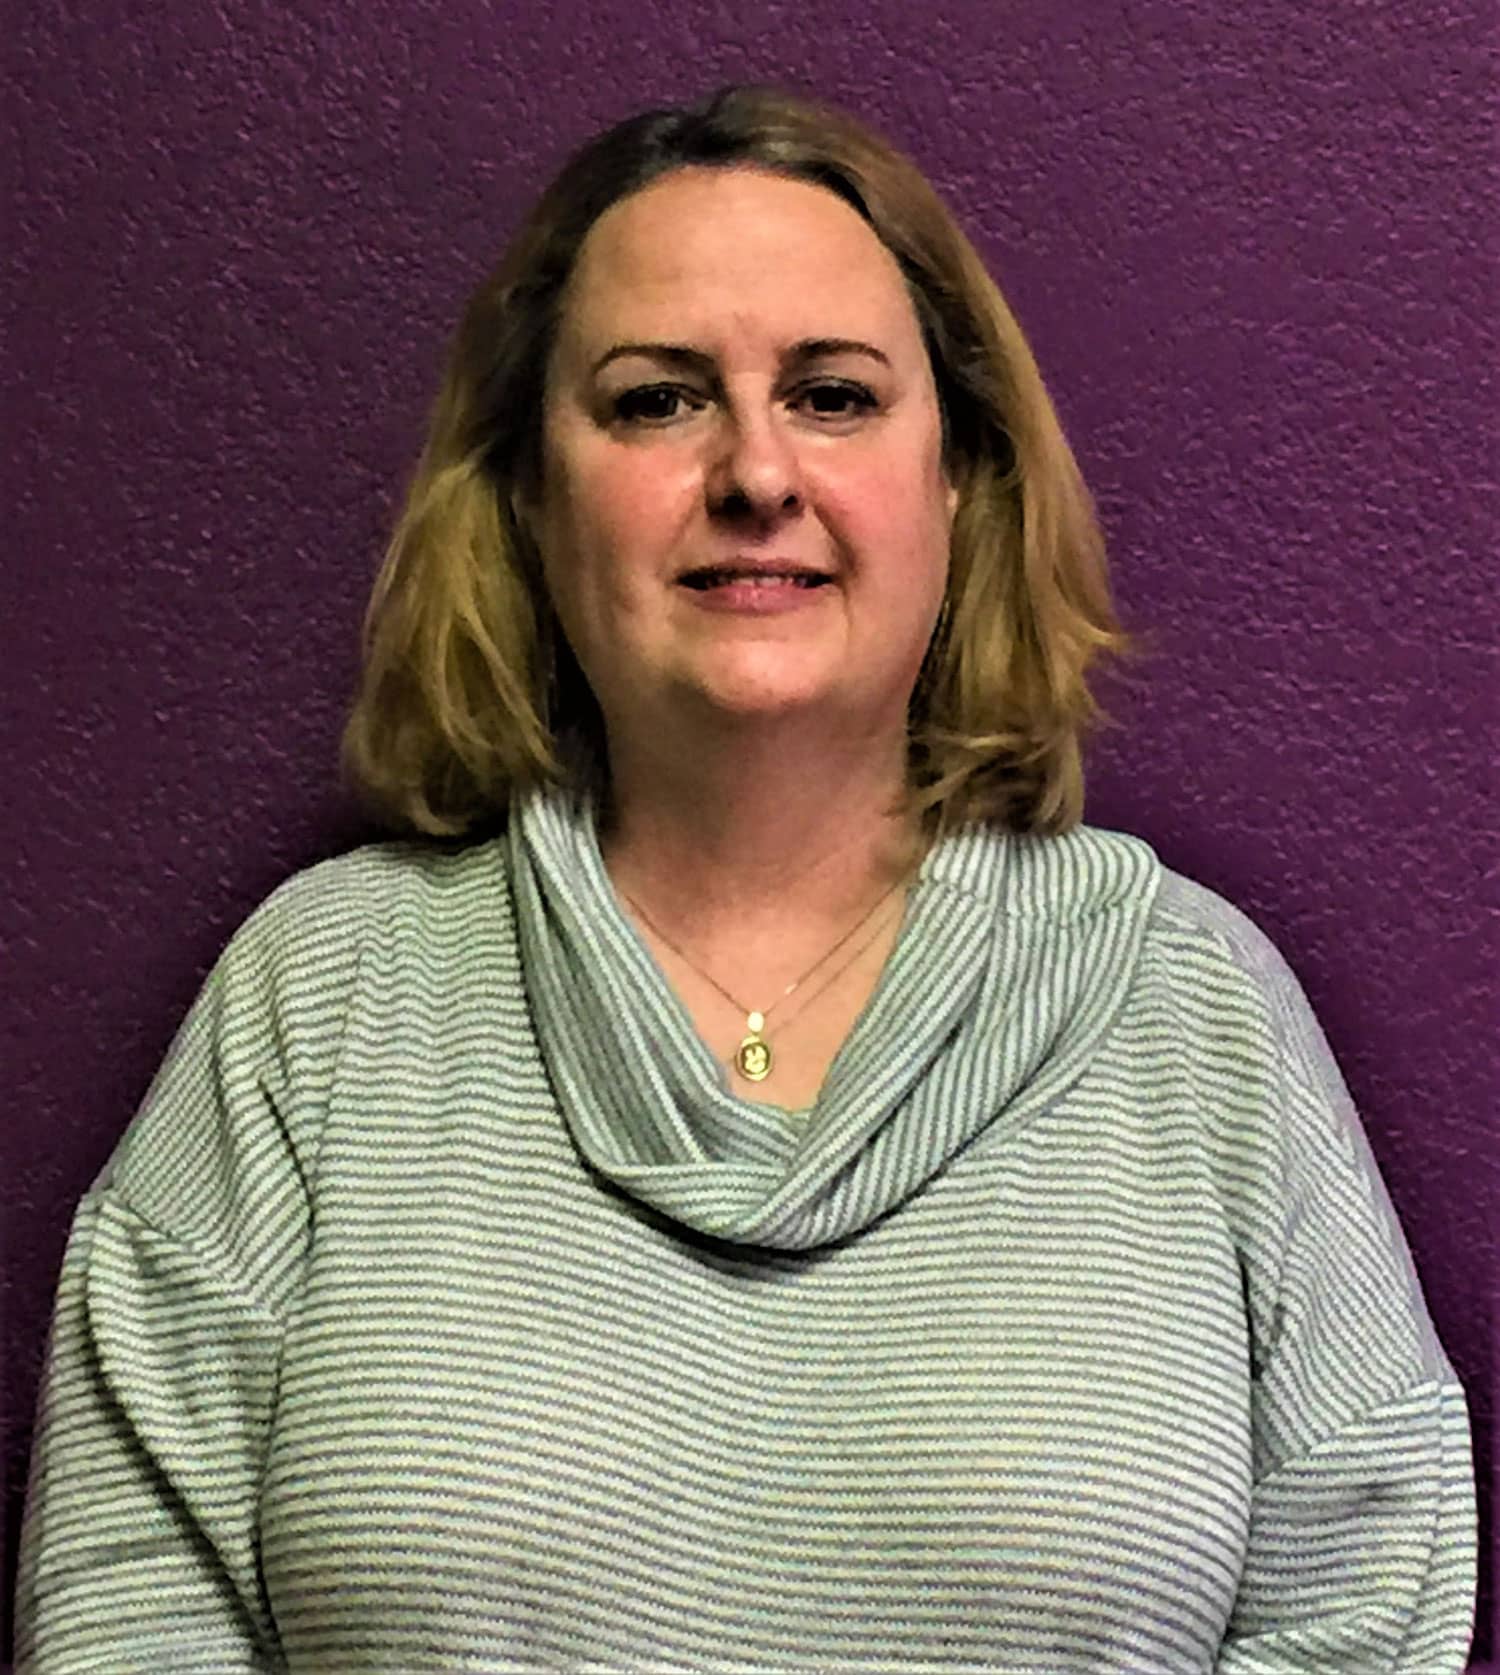 Home Instead Lubbock Caregiver of the Month for February 2022 is Tamra Barron